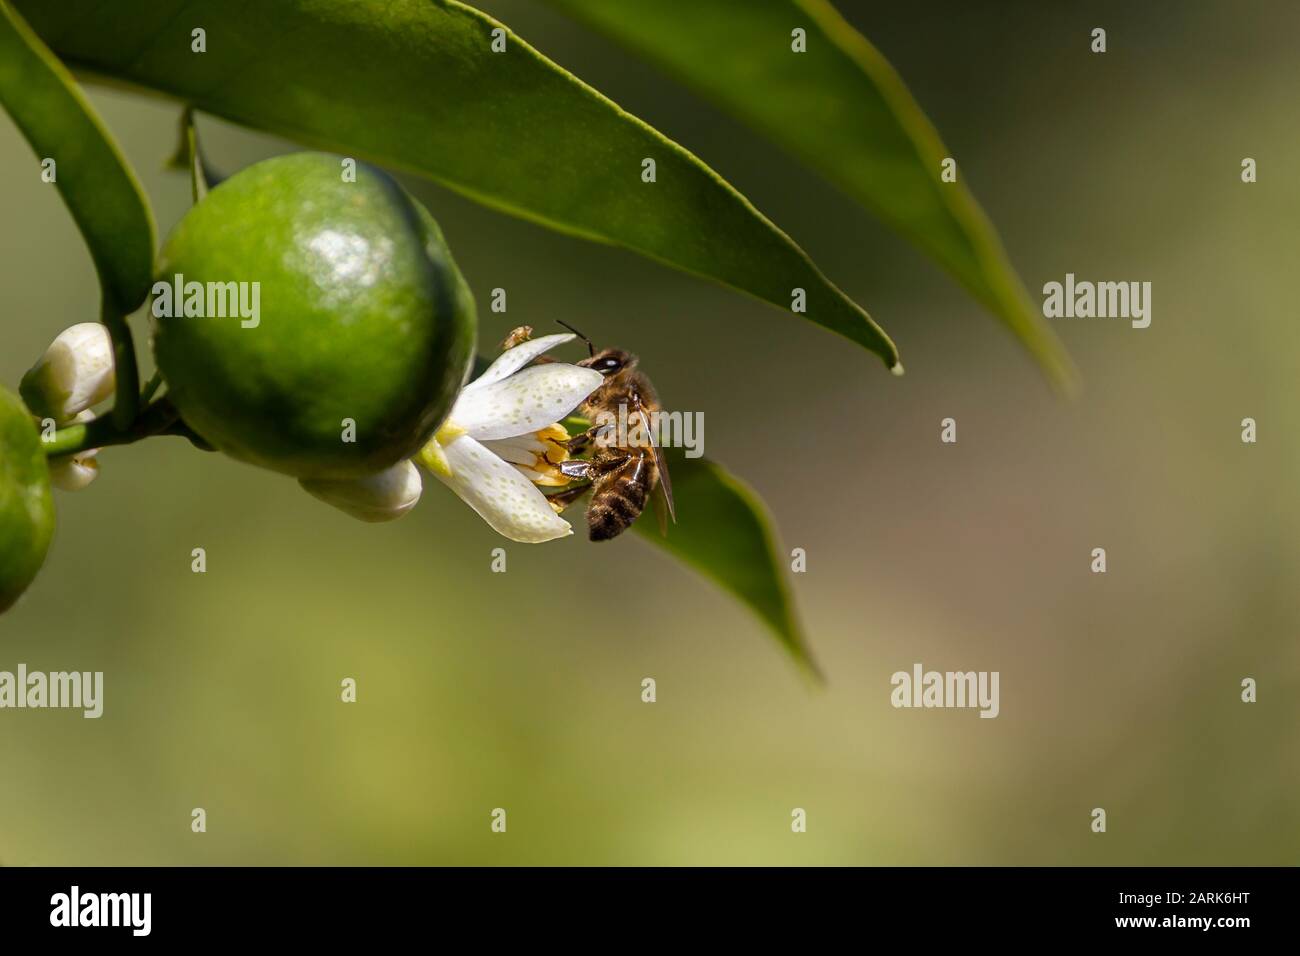 Bee on the flower of a tangerine tree in a sunny winter day, with a small growing tangering fruit Stock Photo